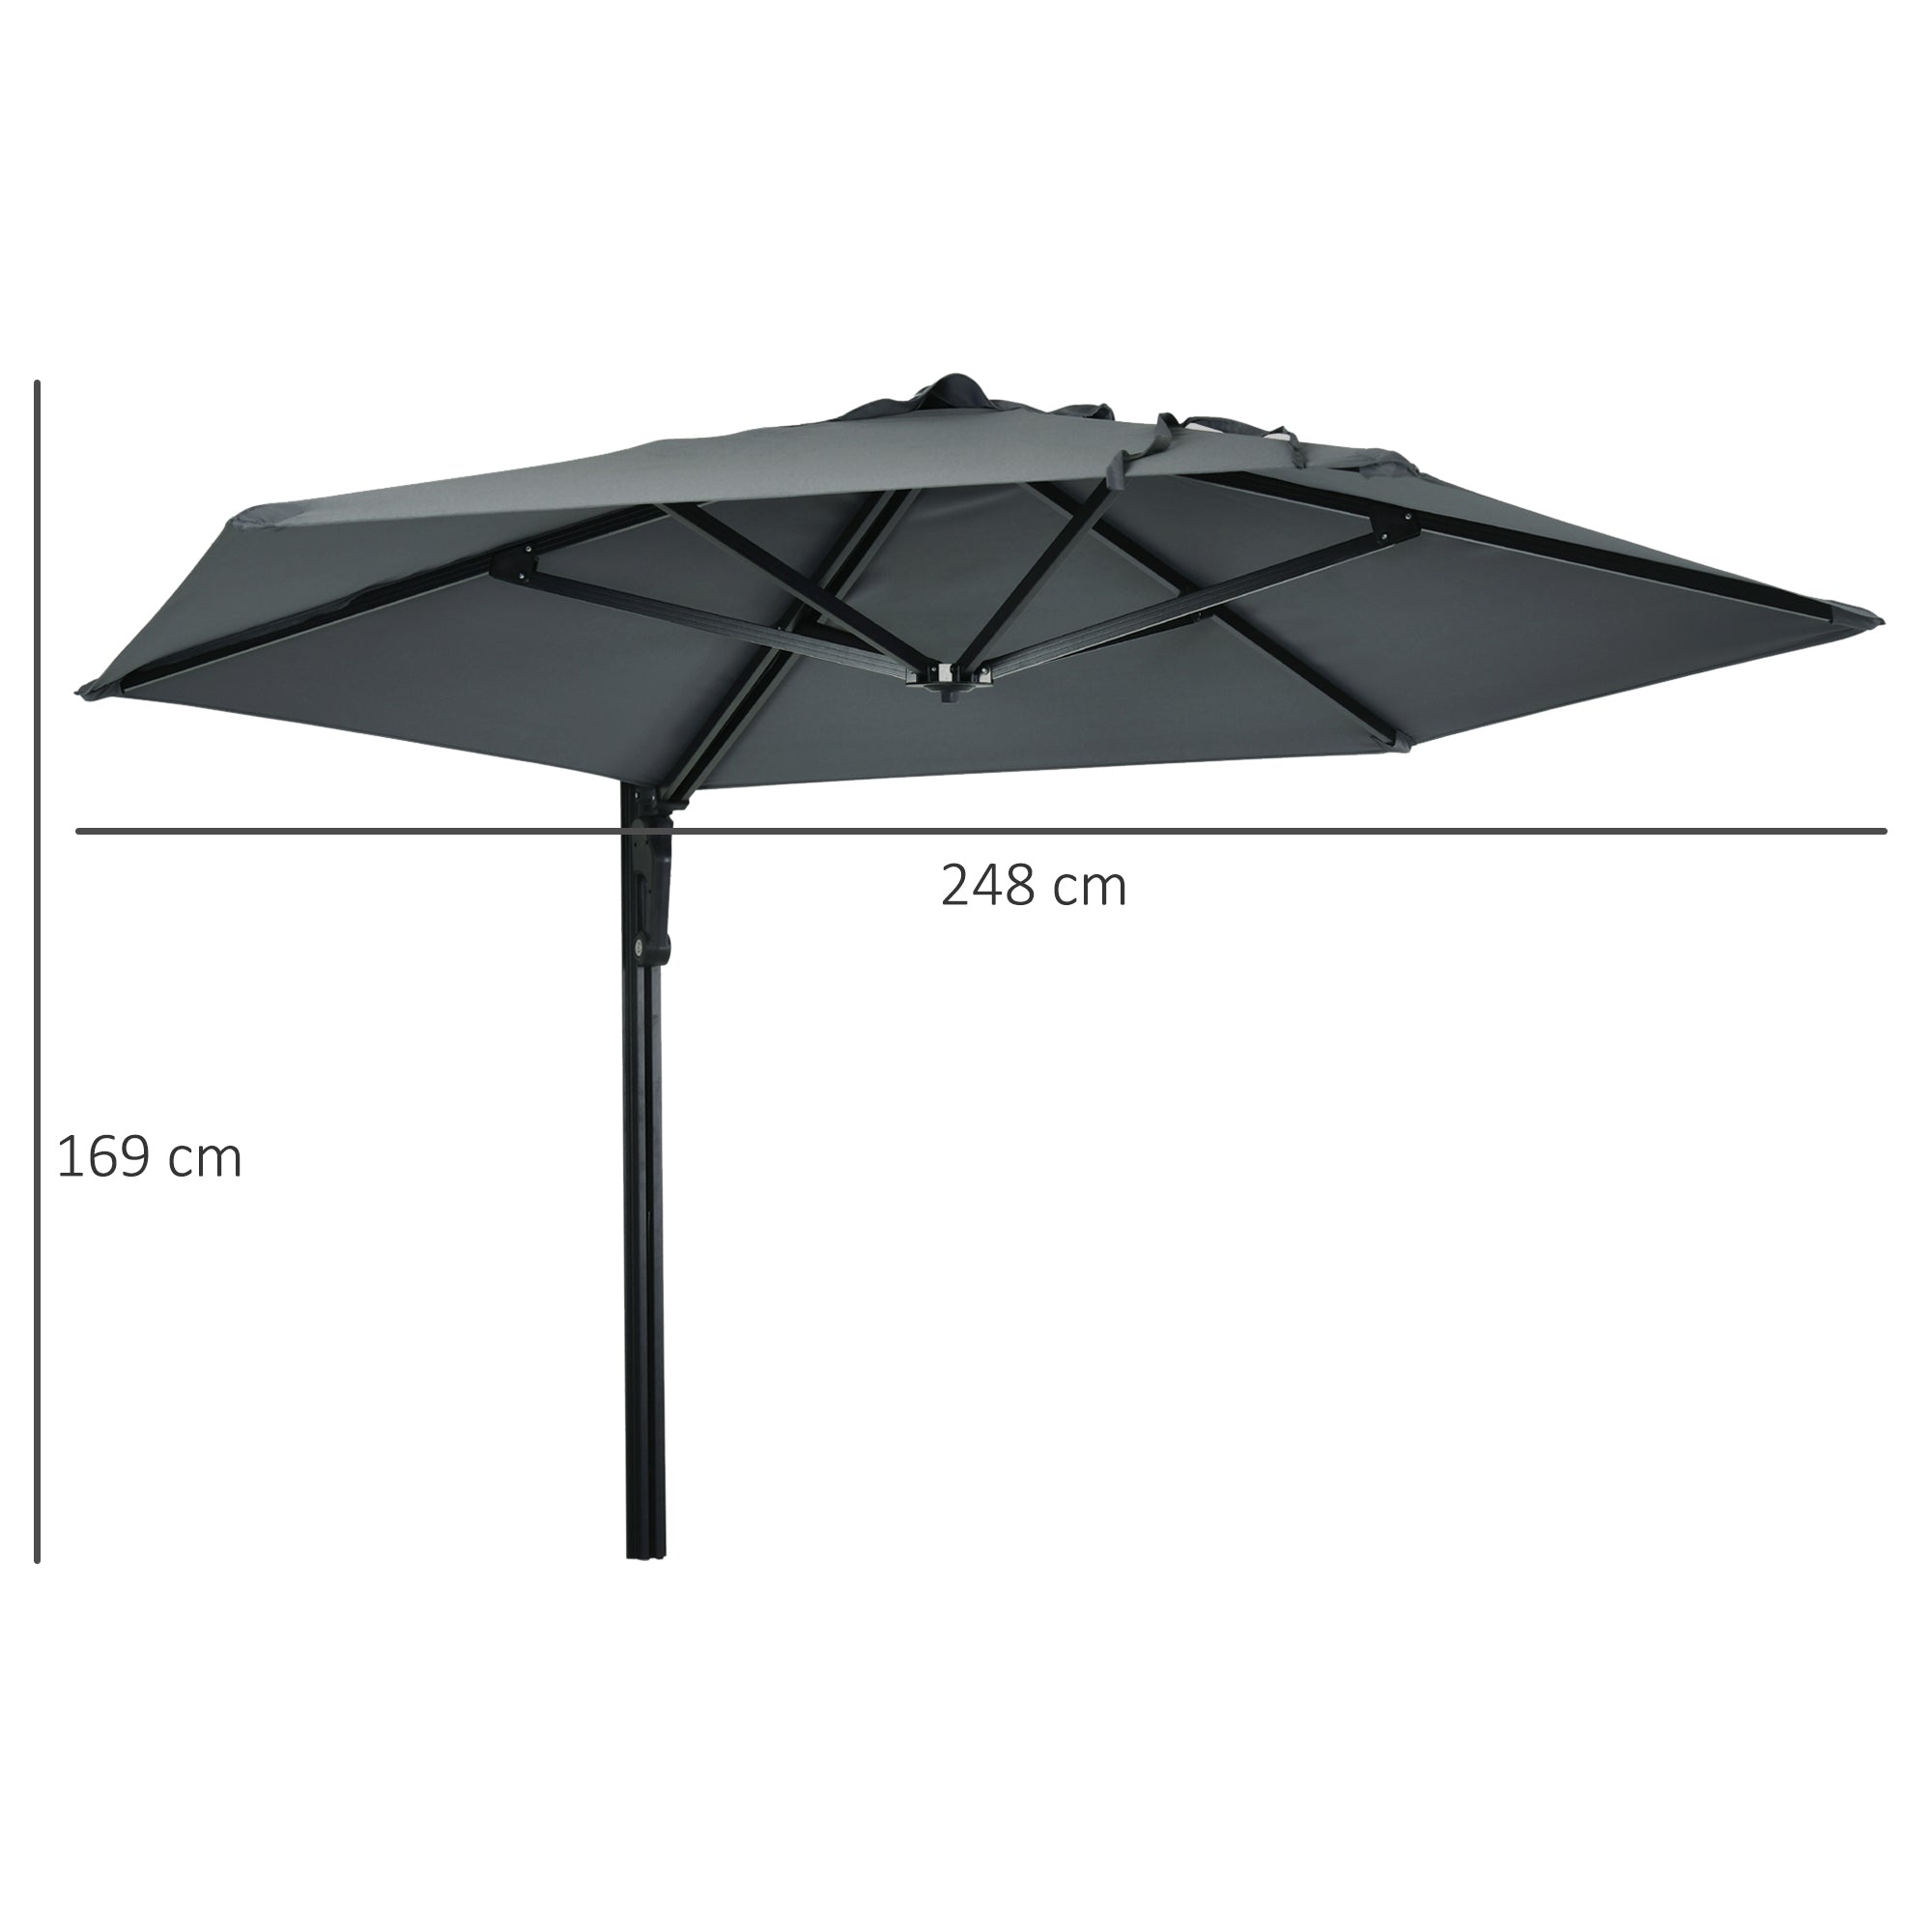 Wall Mounted Parasol, Hand to Push Outdoor Patio Umbrella with 180 Degree Rotatable Canopy for Porch, Deck, Garden, 250 cm, Dark Grey-2